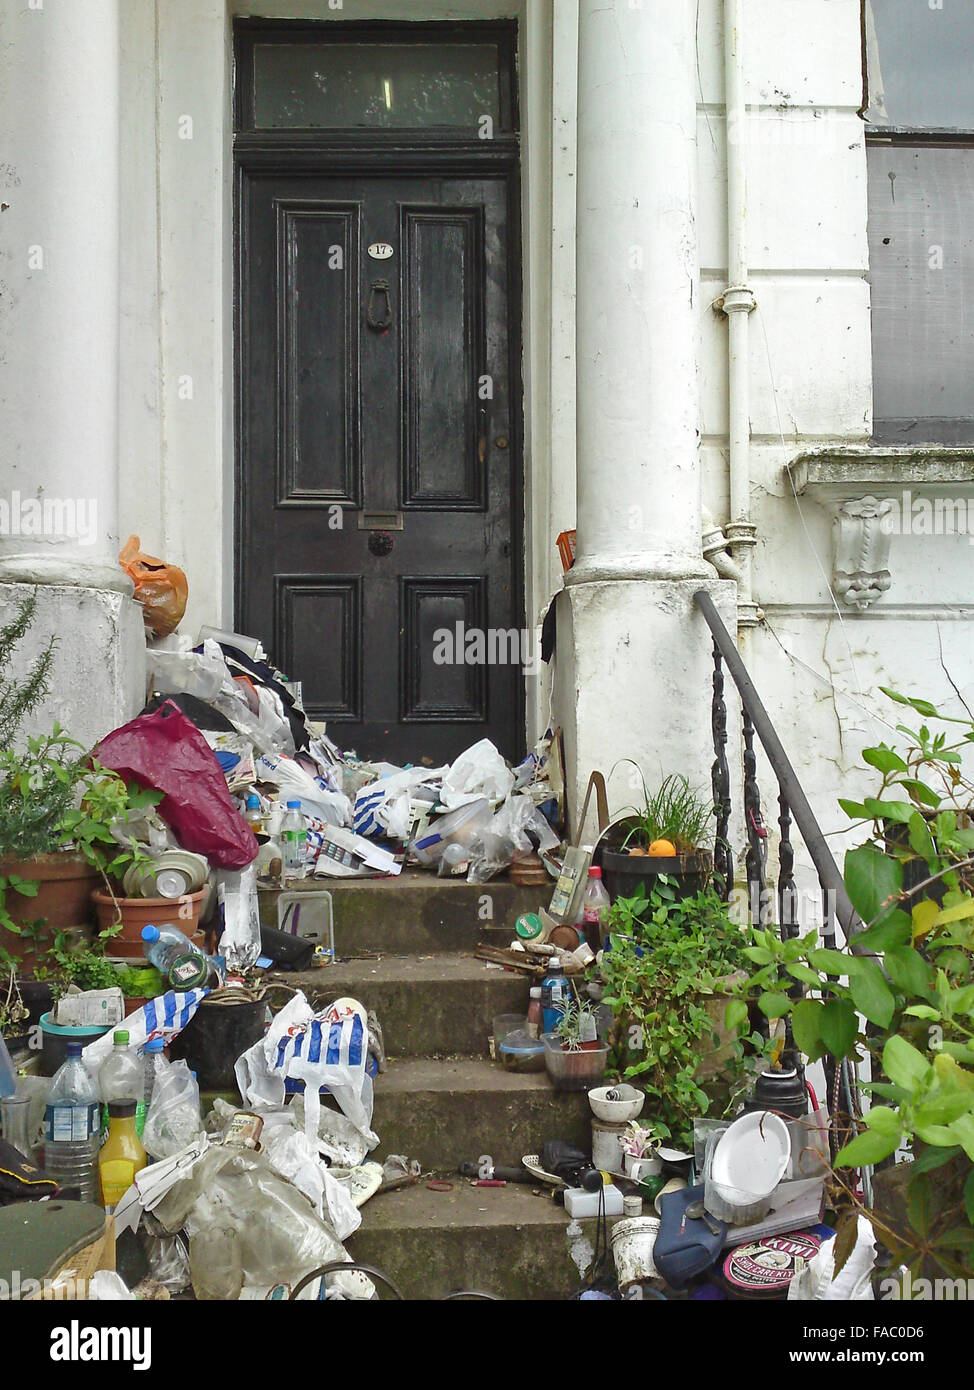 Rubbish by eccentric hoarder pilled up outside expensive neglected property 17 Portland Road, Holland Park, London, England Stock Photo